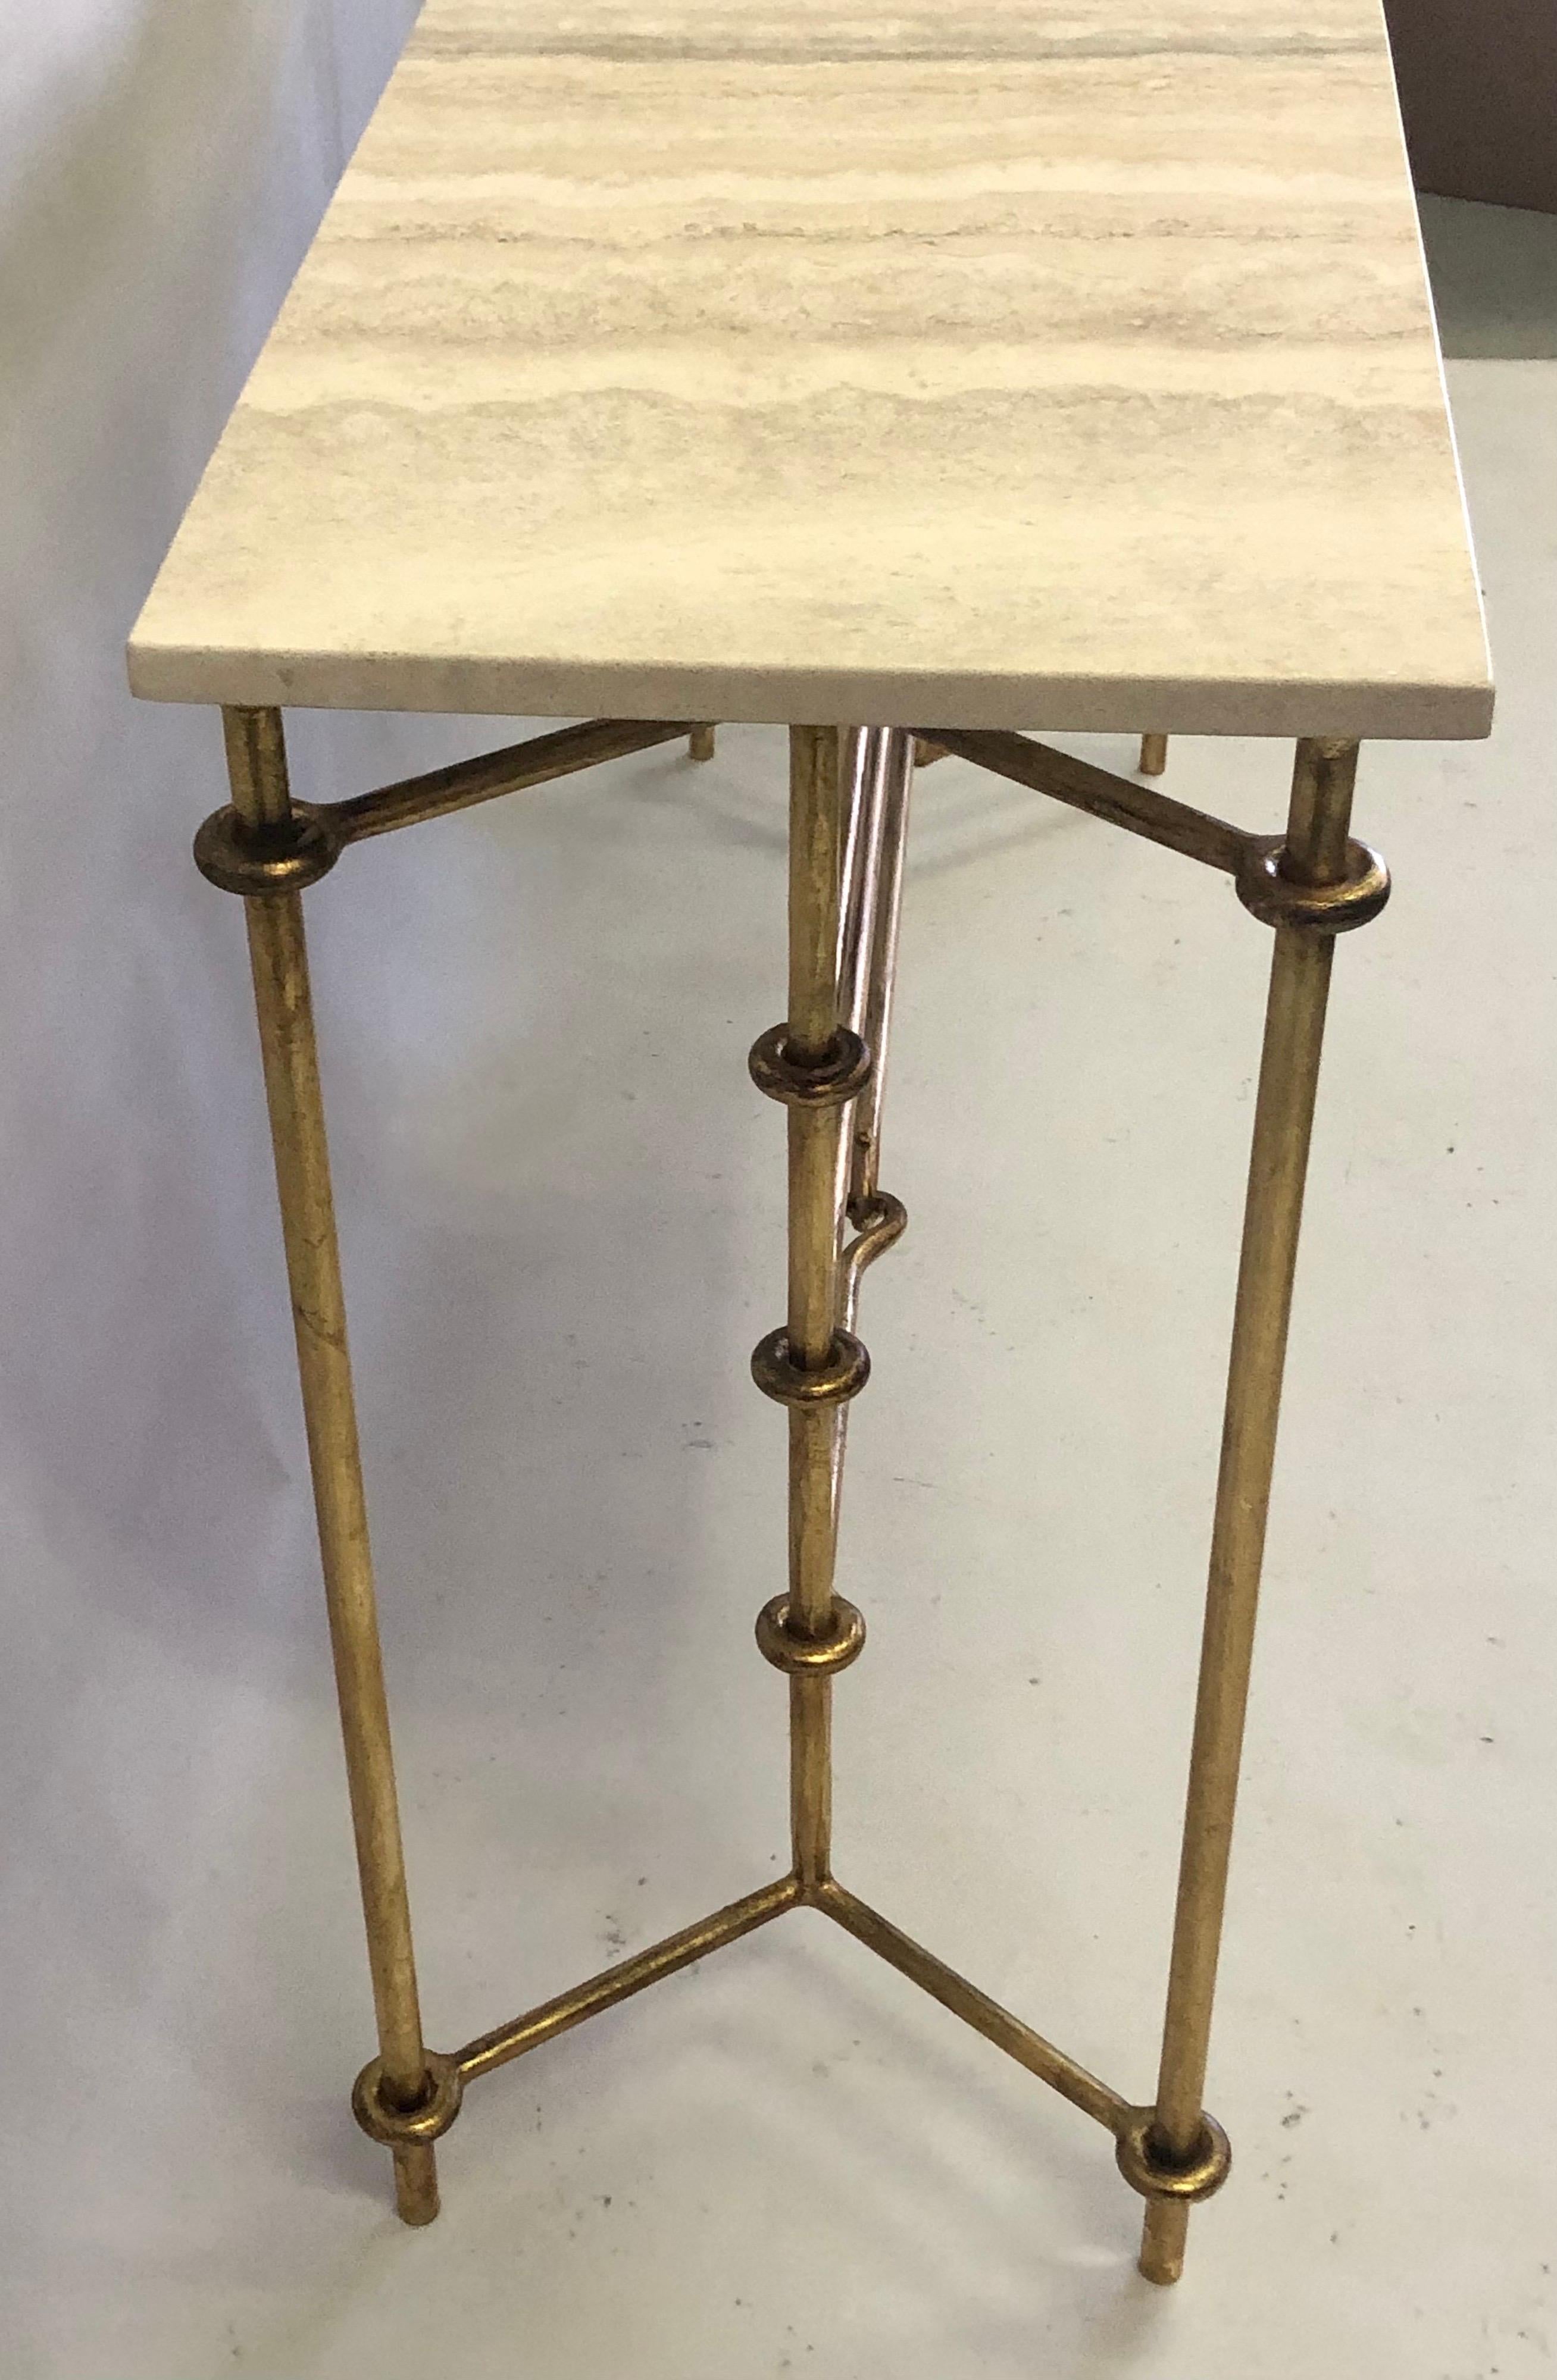 Italian Mid-Century Modern Neoclassical Gilt Iron Console by Banci for Hermès For Sale 3